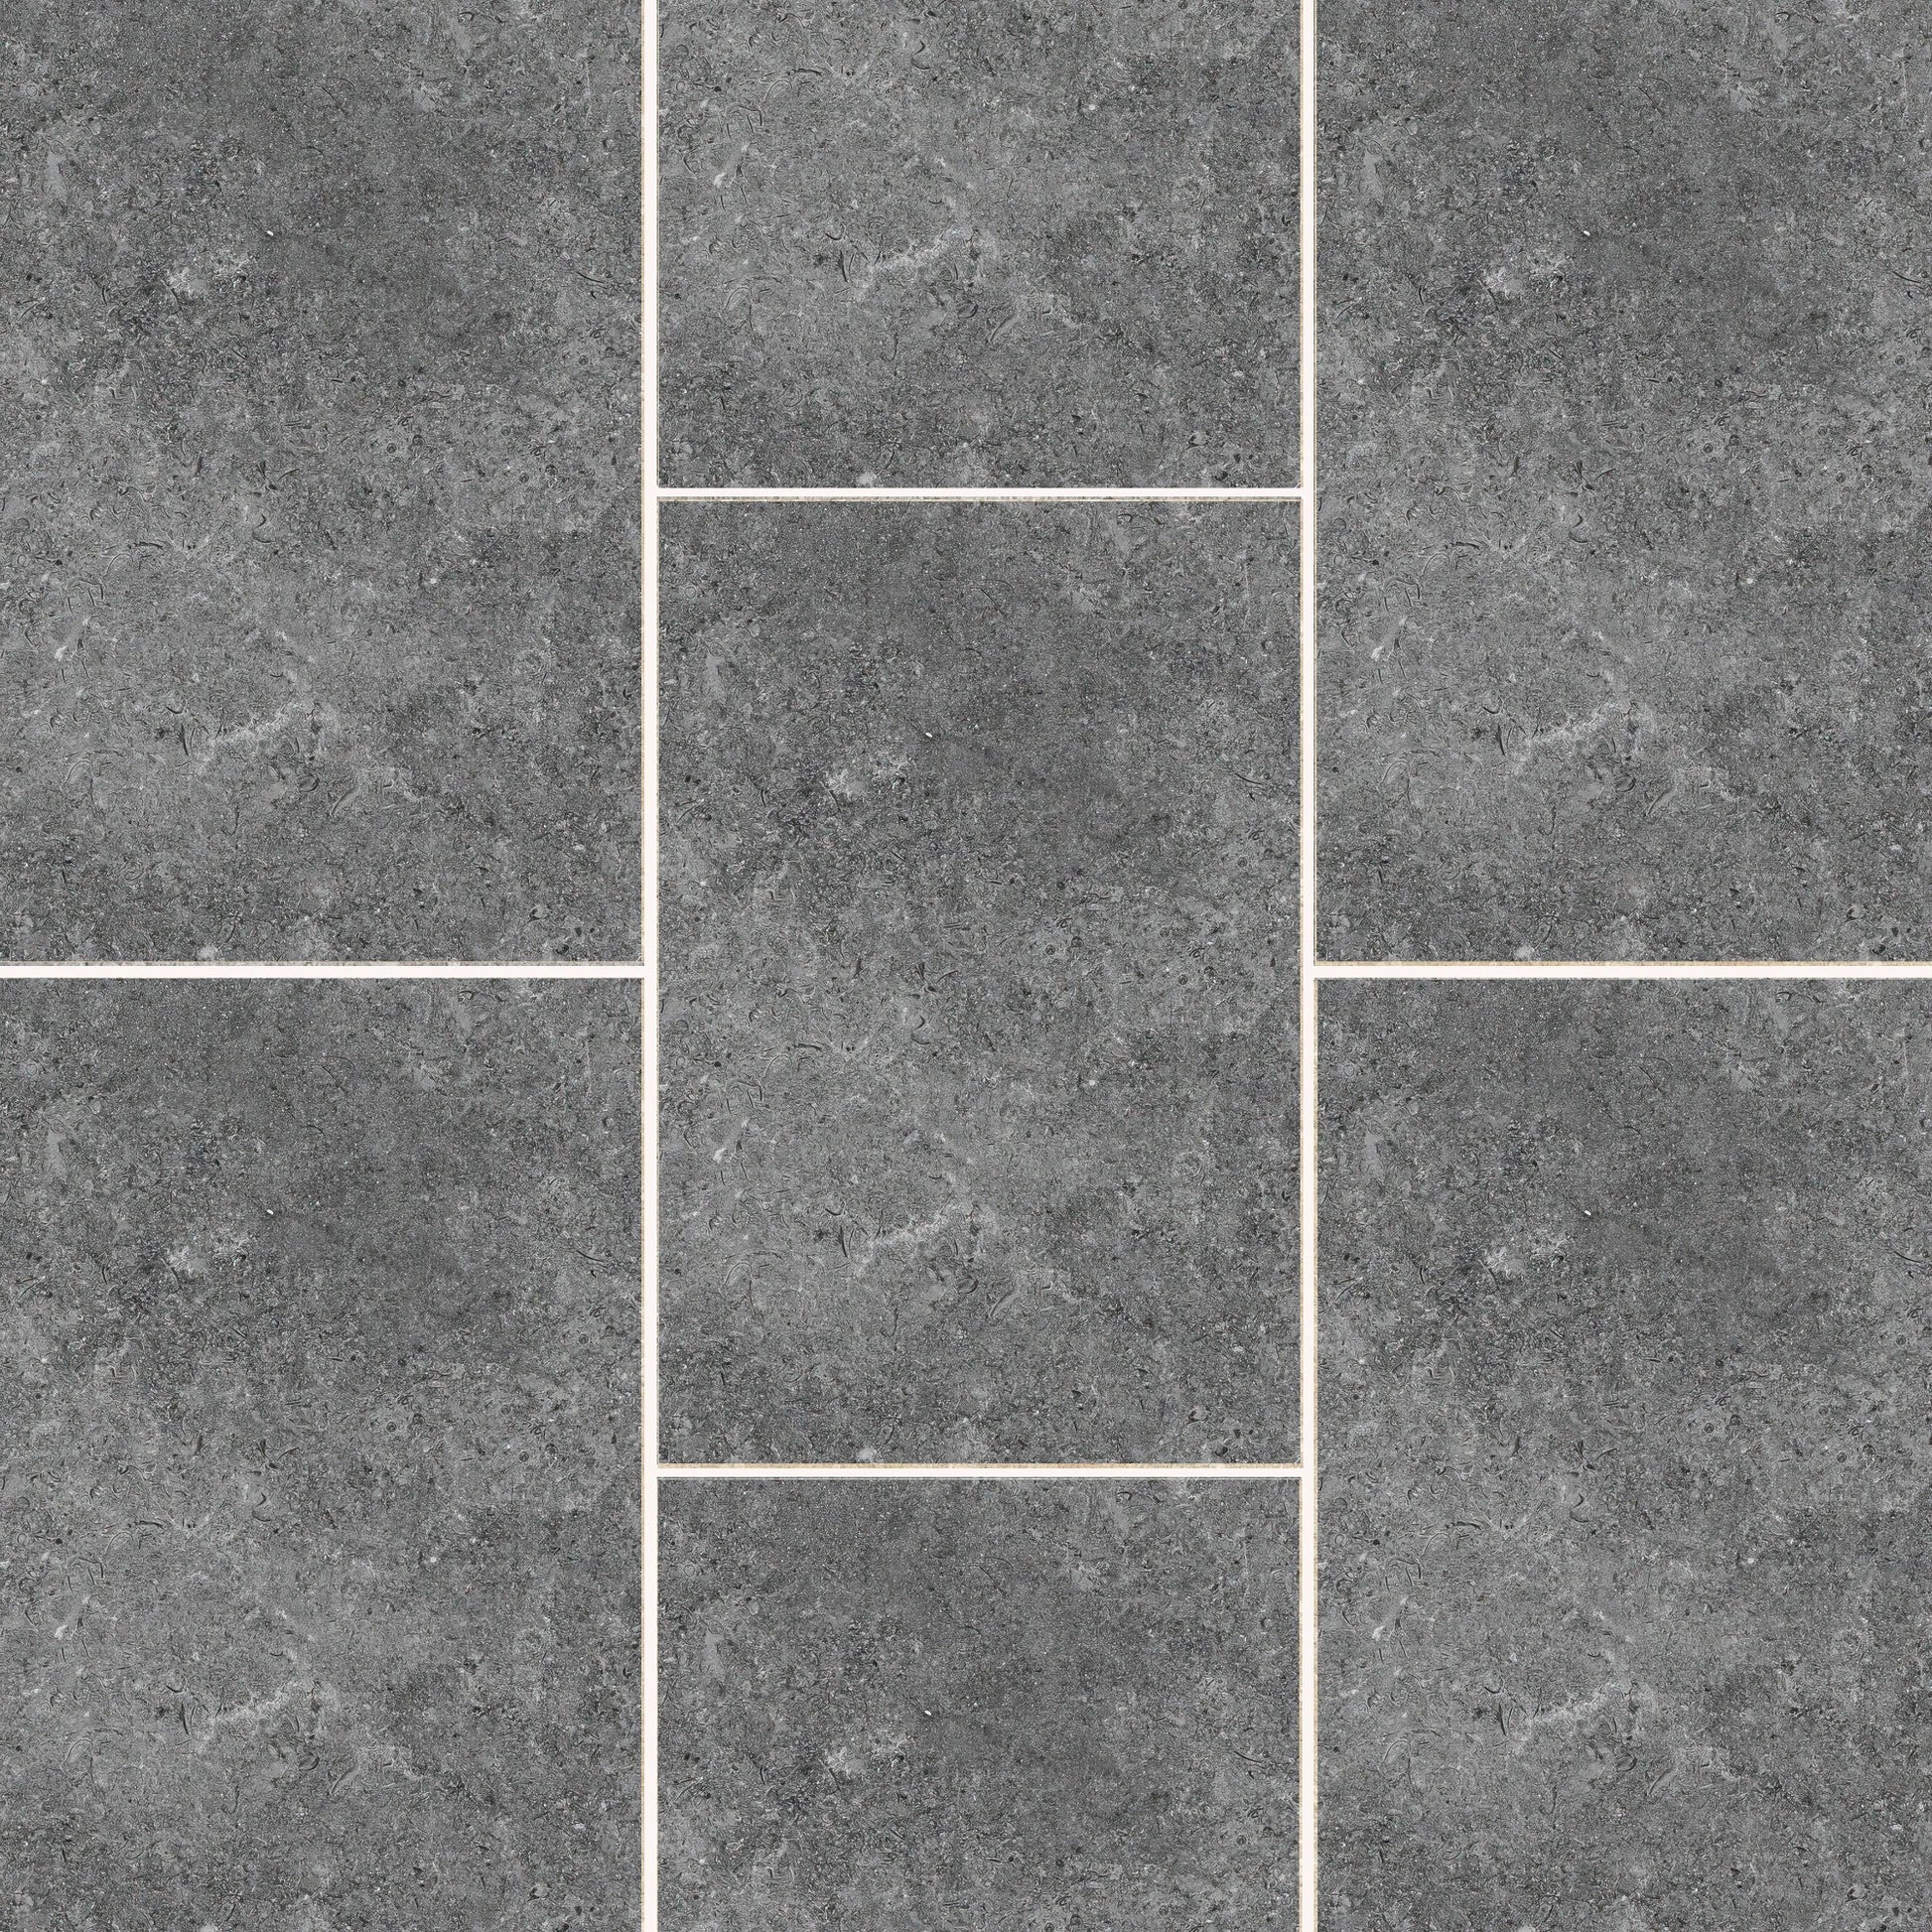 A textured gray tile pattern with pale grout lines. The Carmen Anthracite Porcelain Paving Slabs from Brisks are arranged in a staggered fashion with varied rectangular and square shapes, creating a uniform yet visually engaging surface. The sleek finish has a slight mottled appearance, adding depth to the Brisks Carmen Anthracite tones.